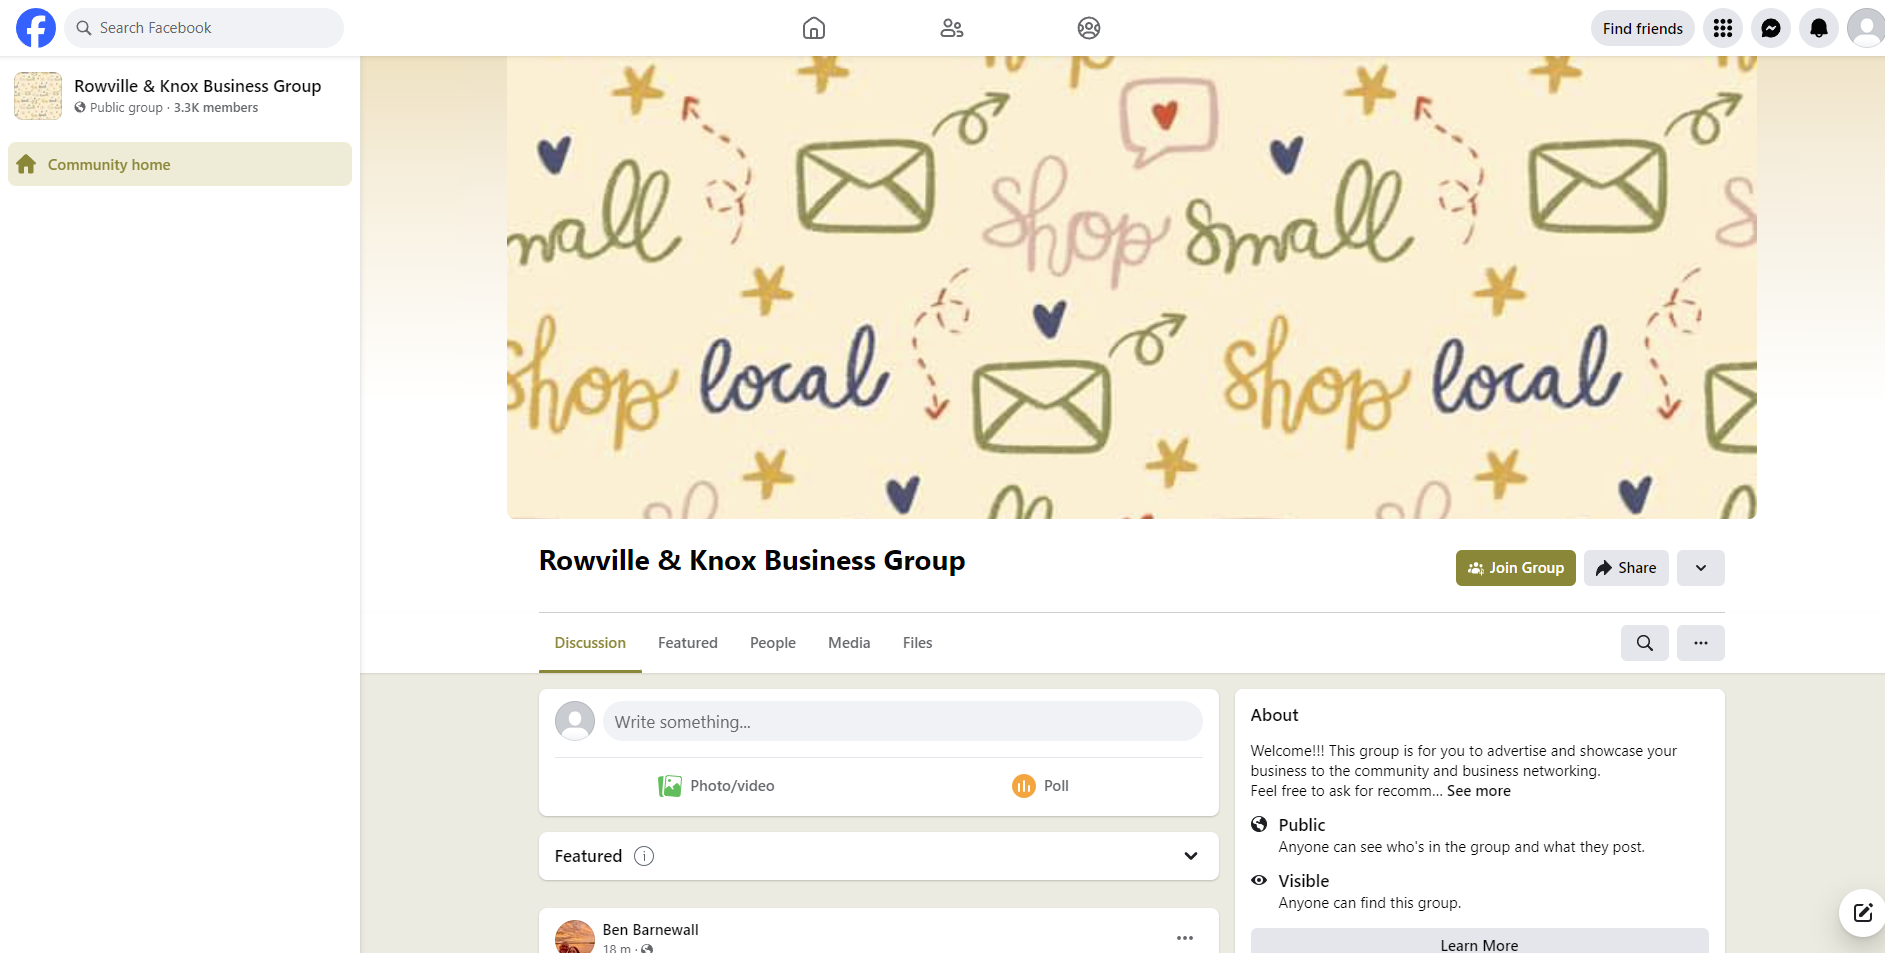 Rowville & Knox Business Group